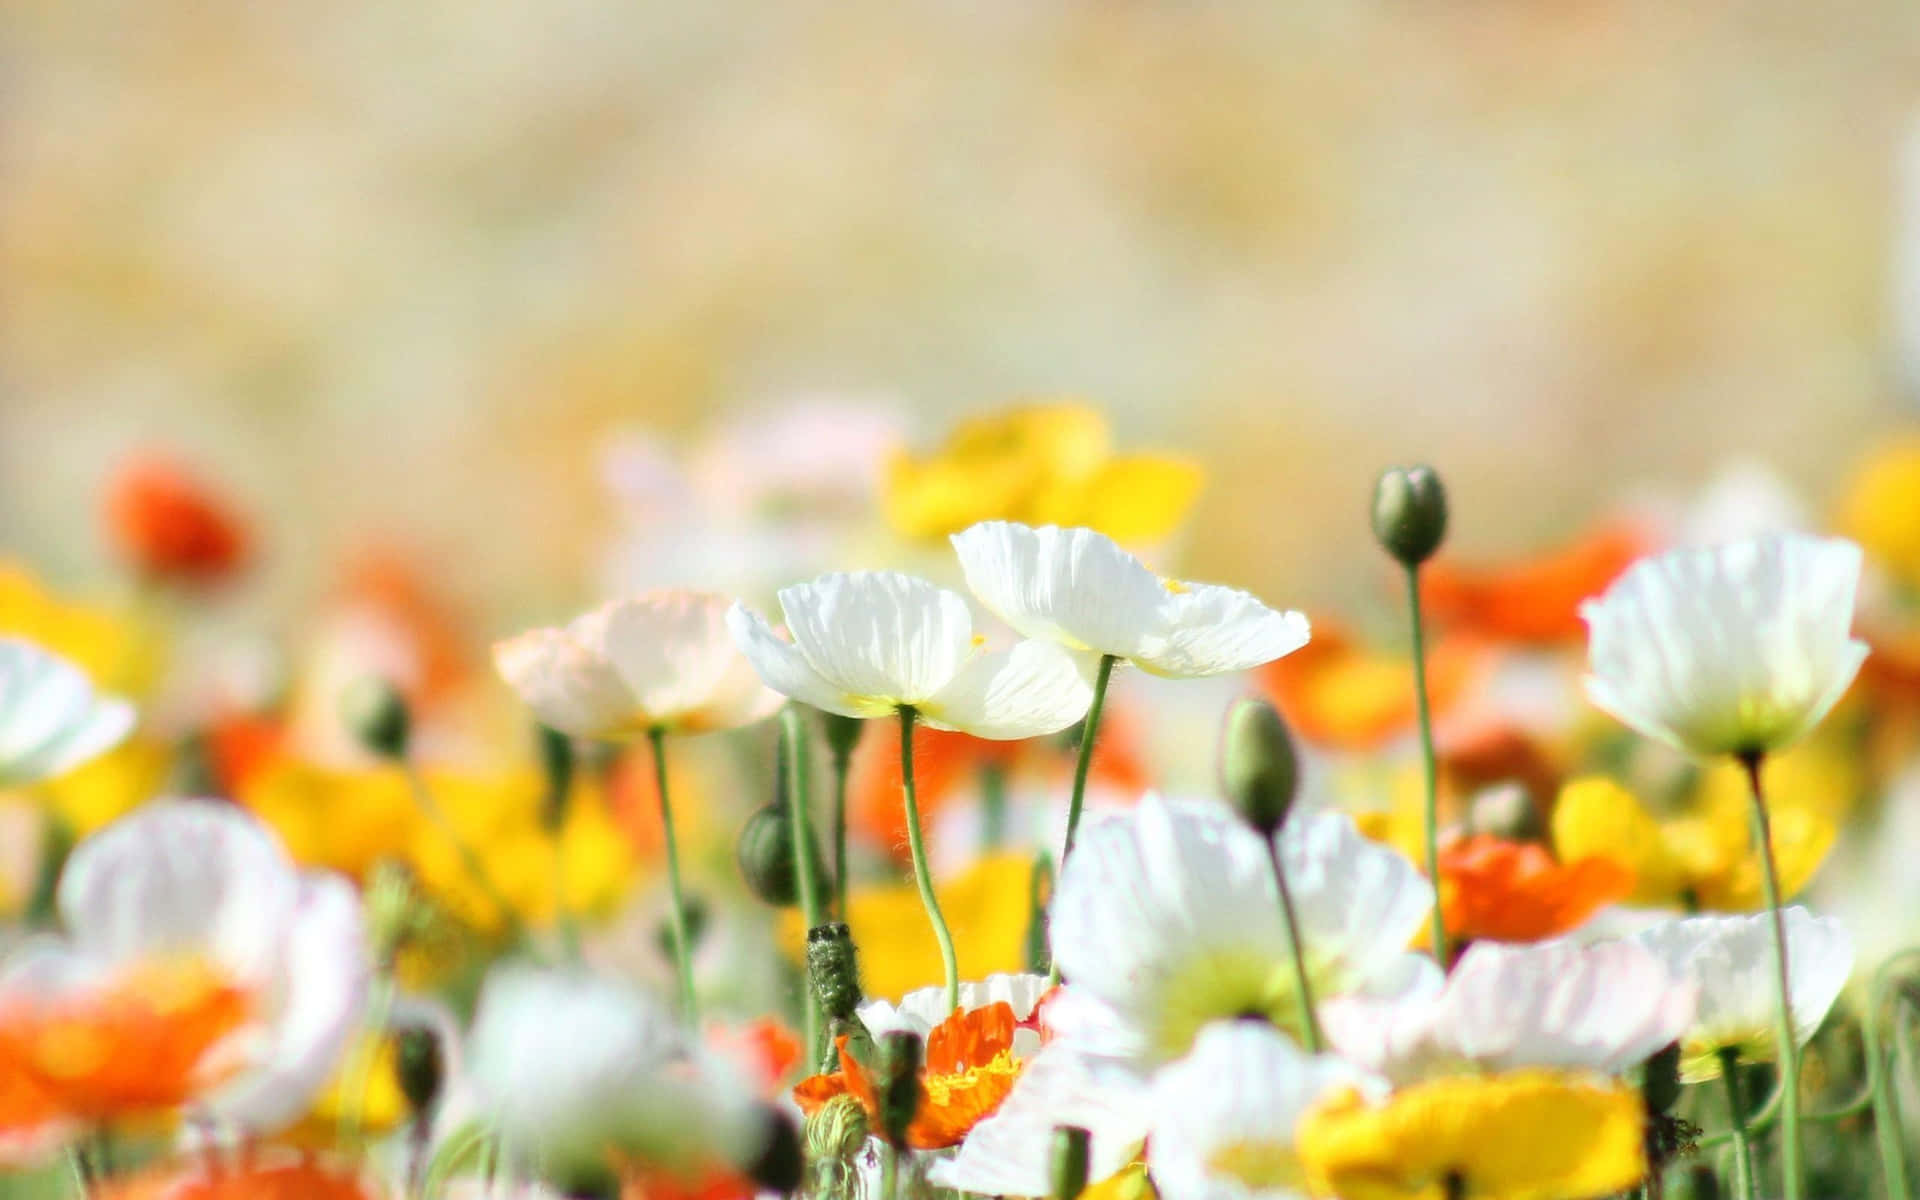 A Field Of White And Orange Flowers